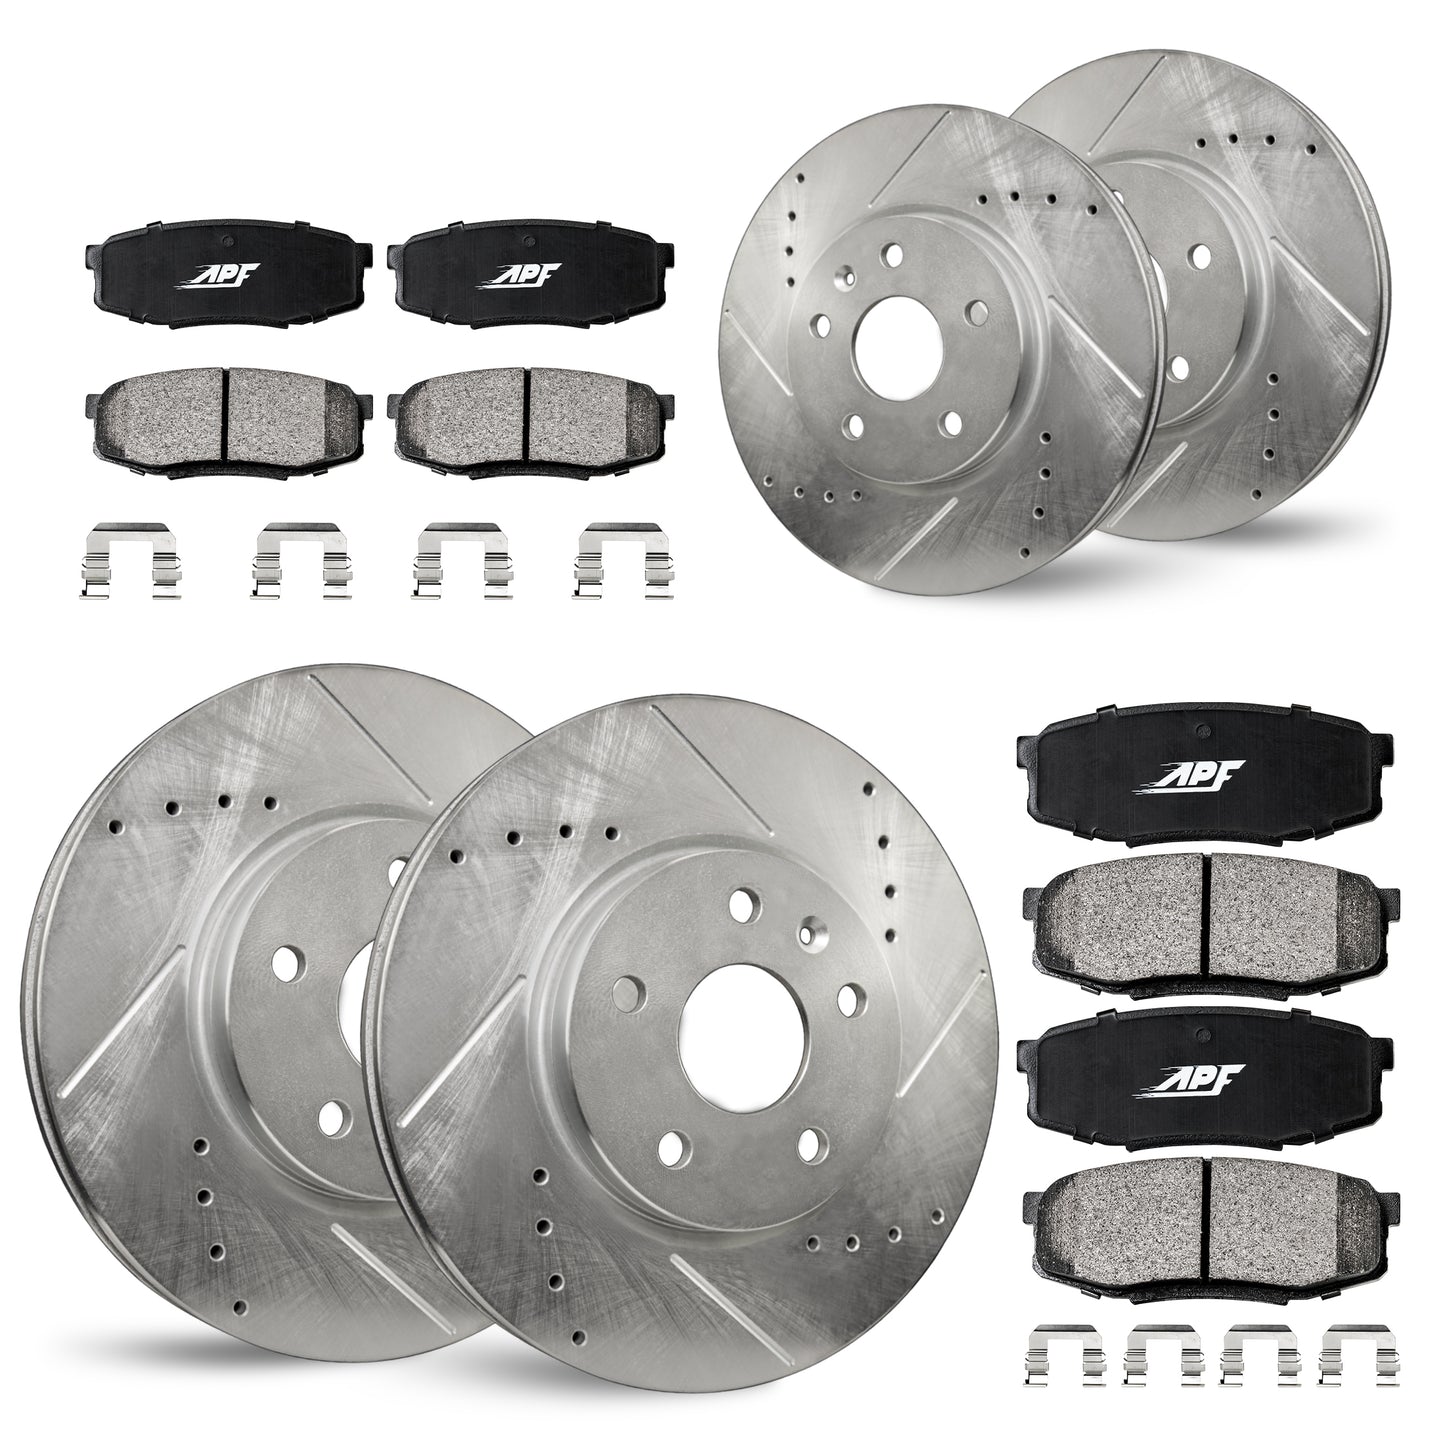 APF Full Kit compatible with Nissan Murano 2006-2007 | Zinc Drilled Slotted Rotors with Ceramic Carbon Fiber Brake Pads